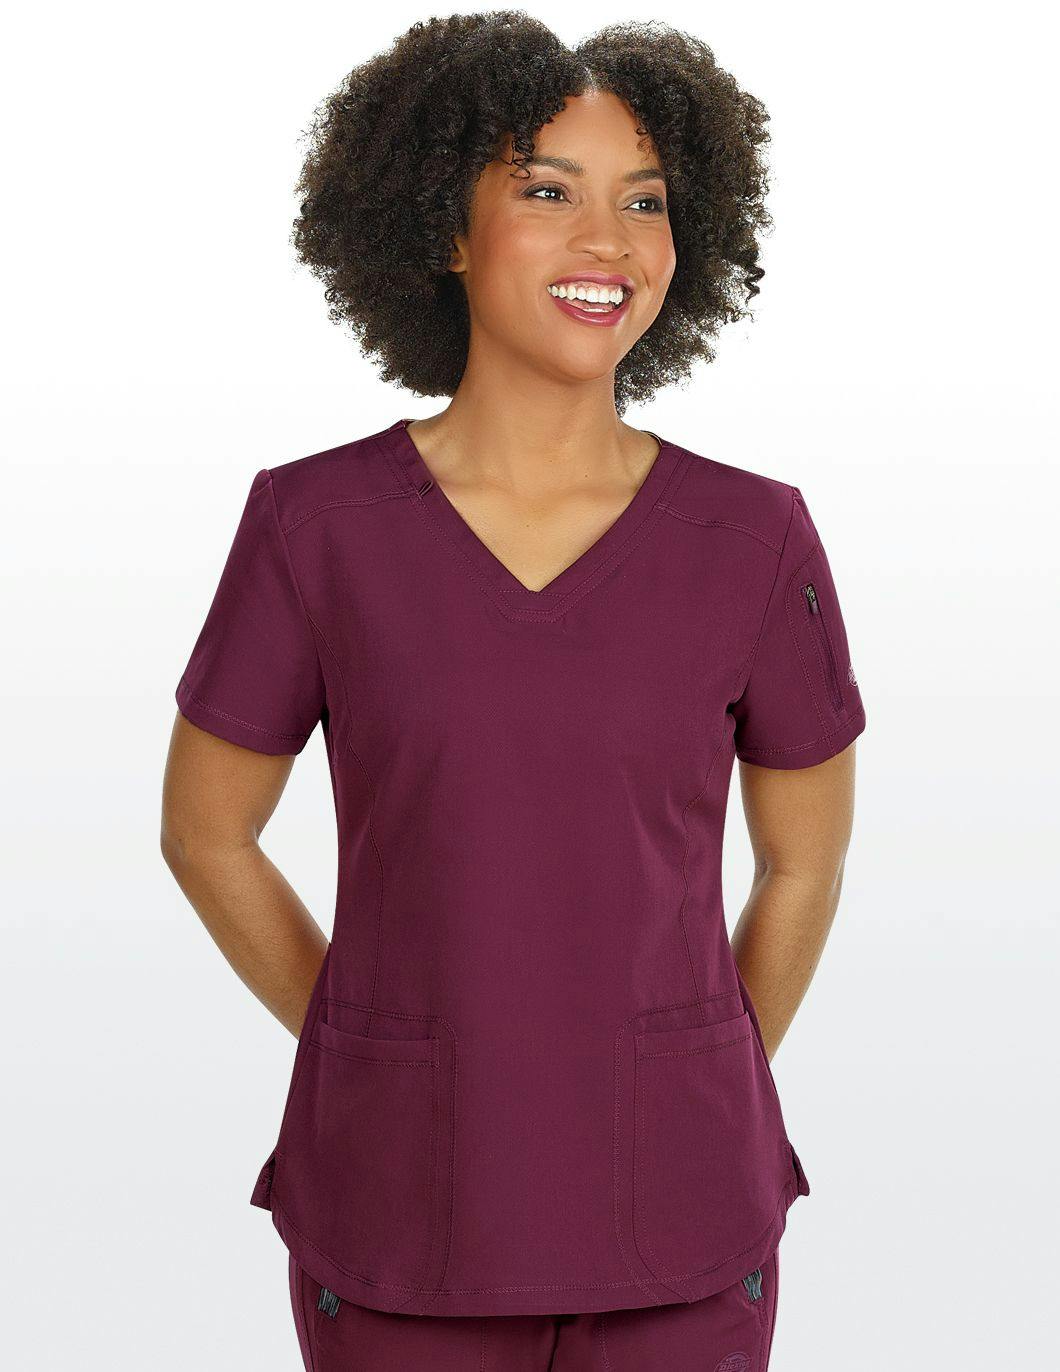 dickies-dynamix-womens-melange-vneck-top-with-paws-wine